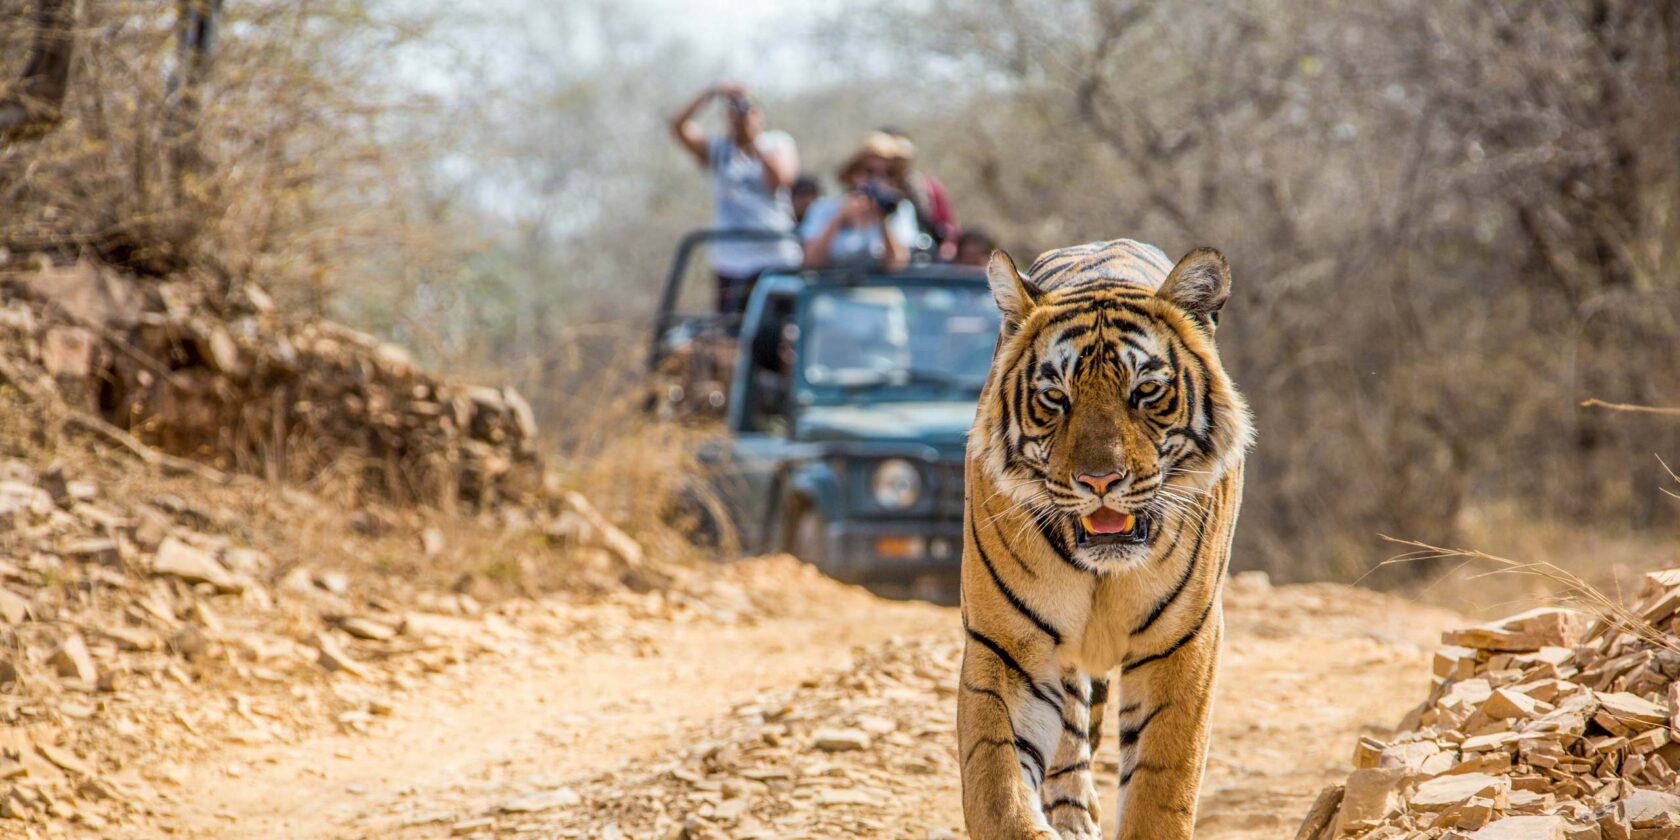 Bengal Tiger is walking on the road in front of a safari jeep.